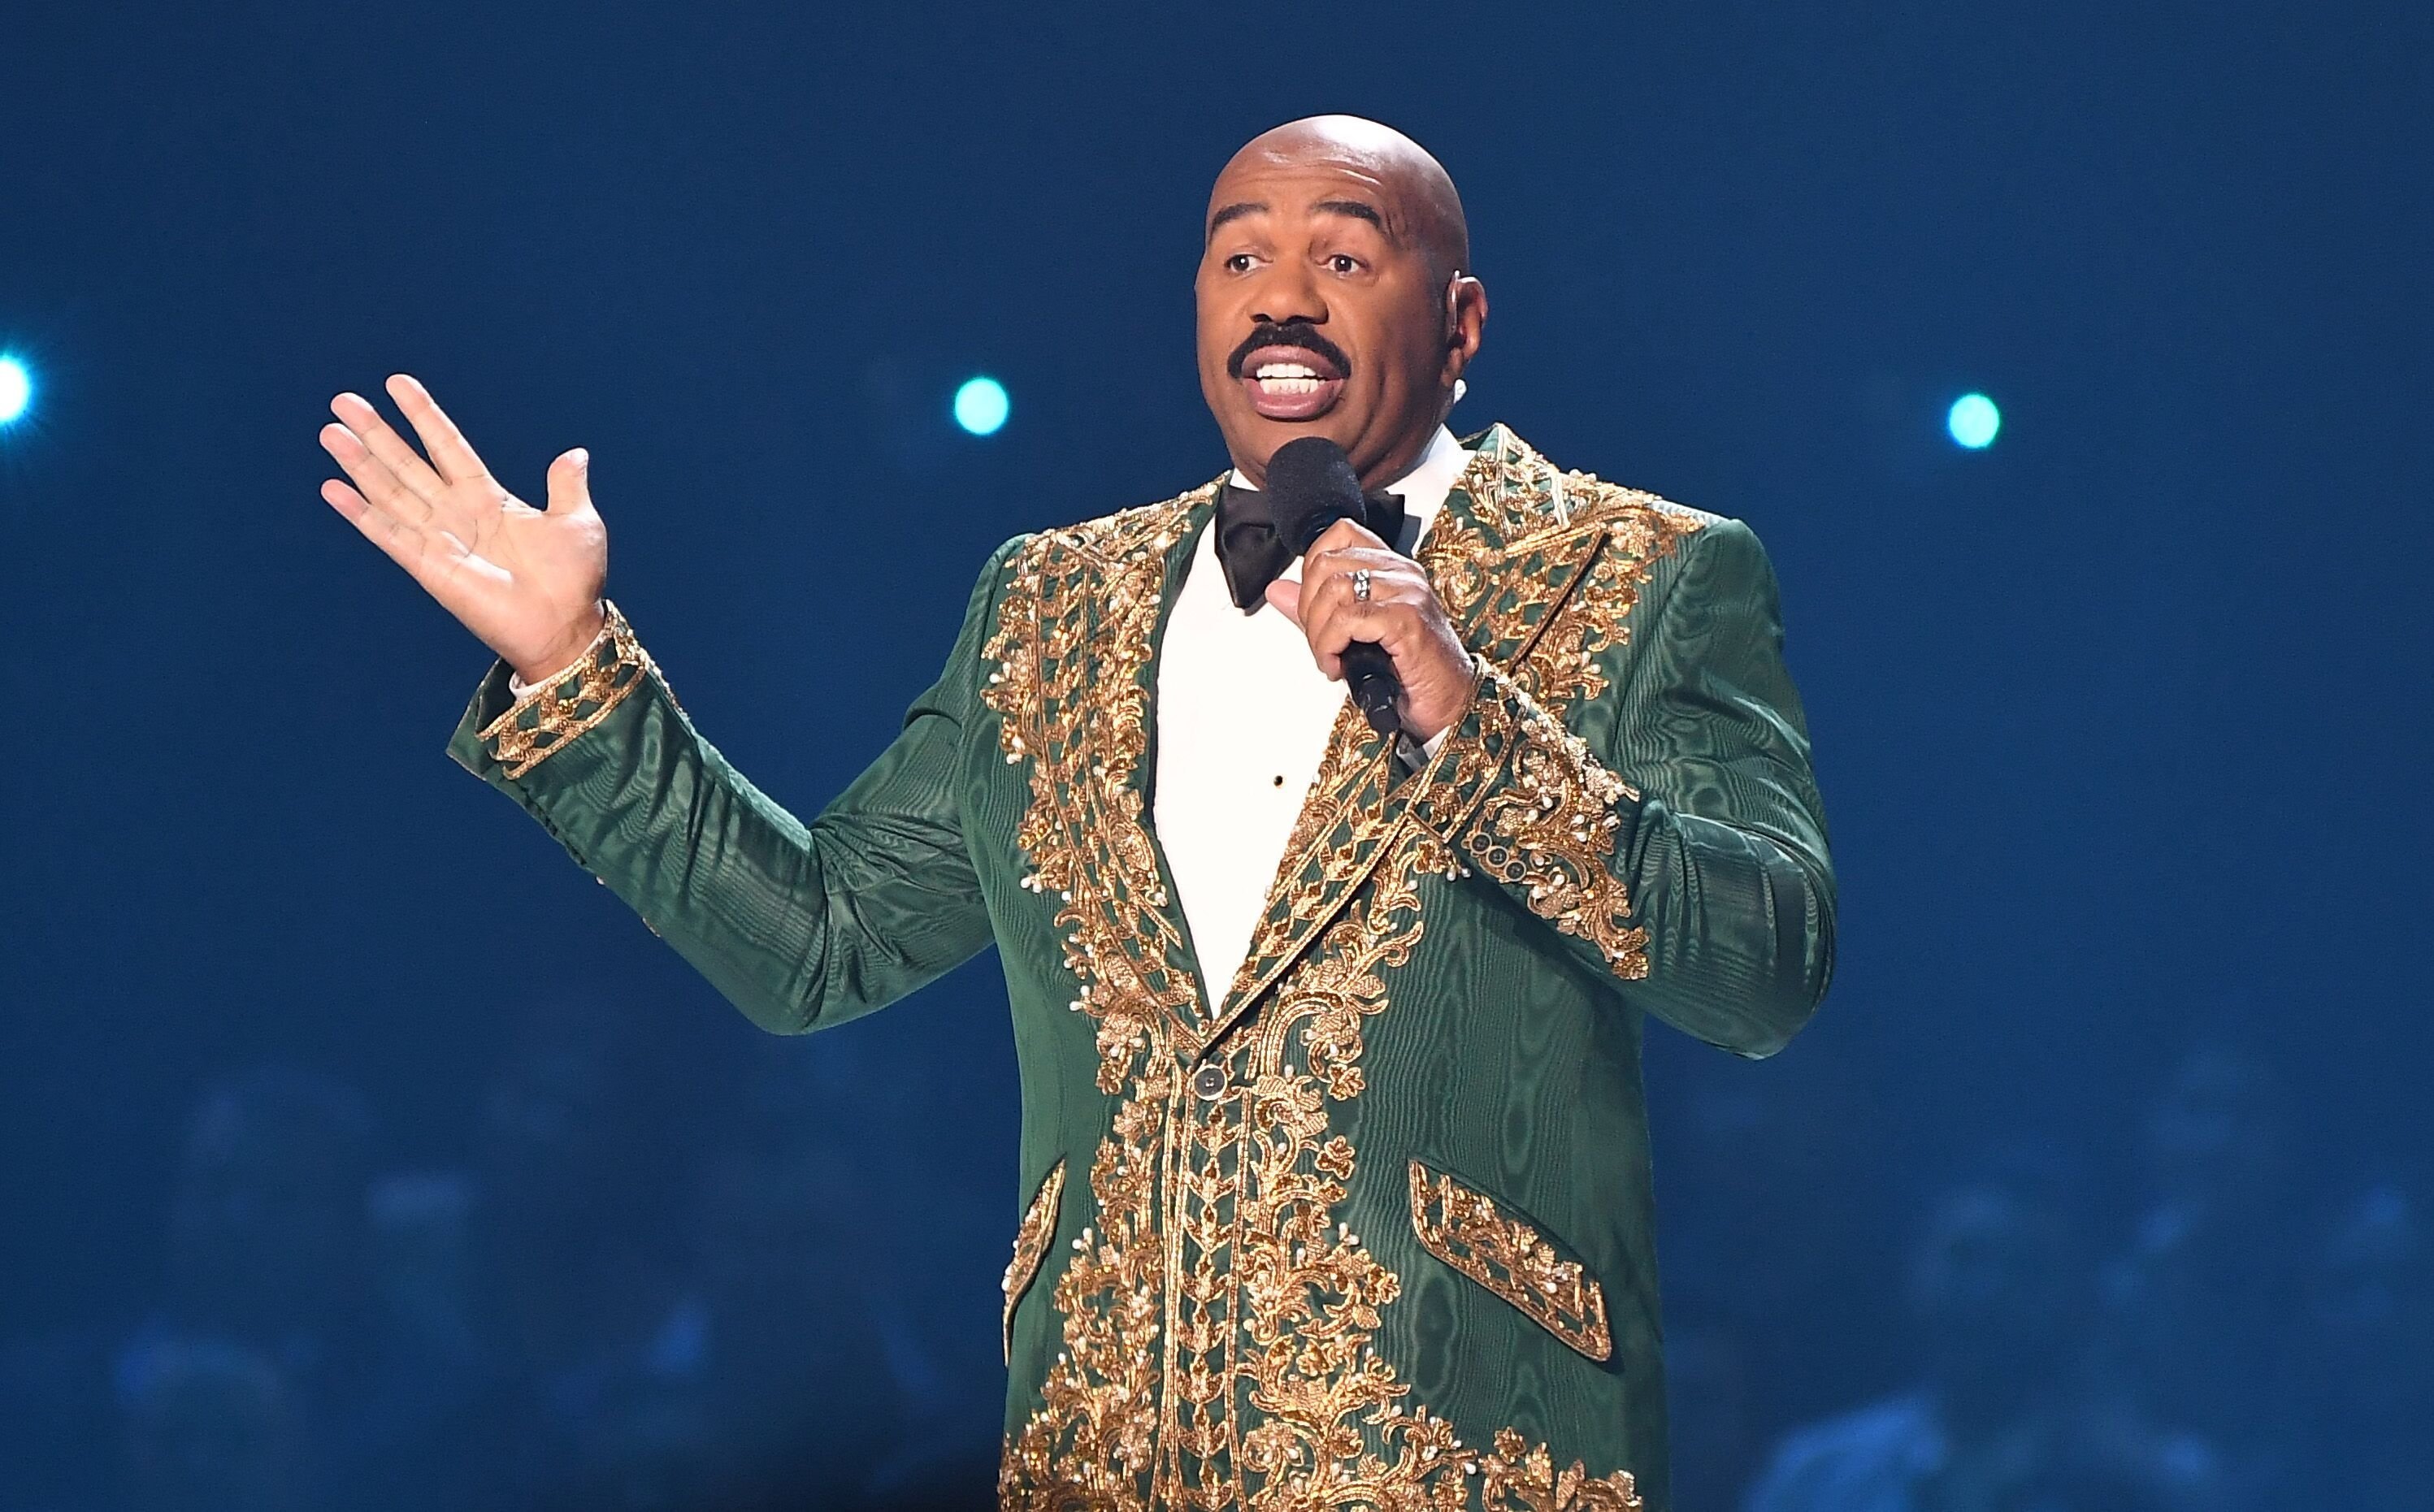 Steve Harvey at the 2019 Miss Universe pageant/ Source: Getty Images